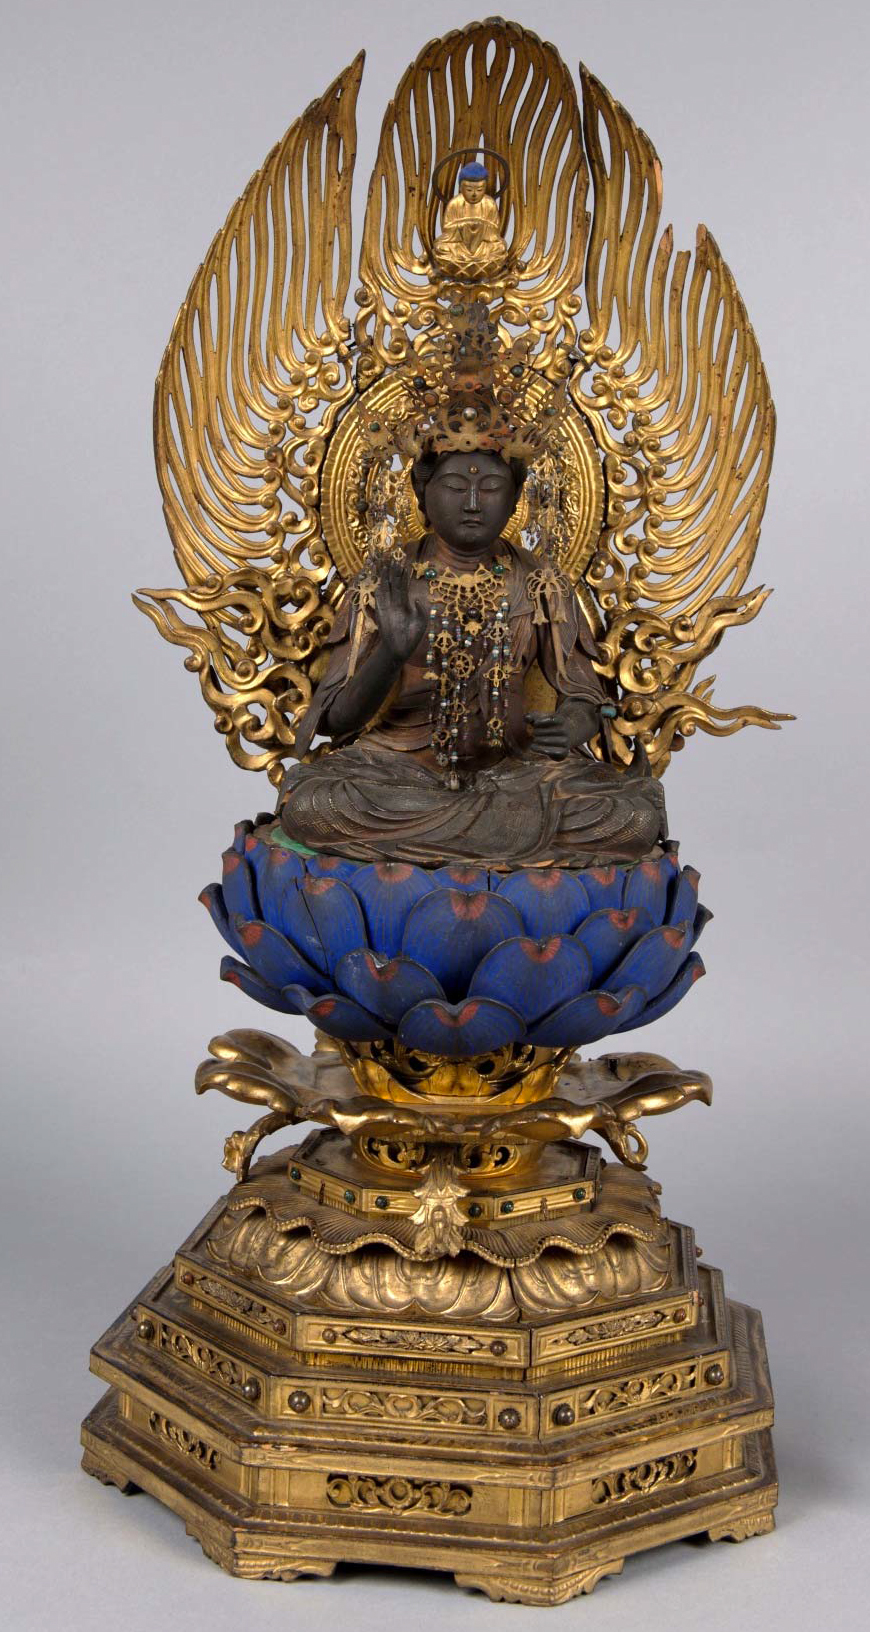 A 19th century Buddhist temple statuette from Japan.